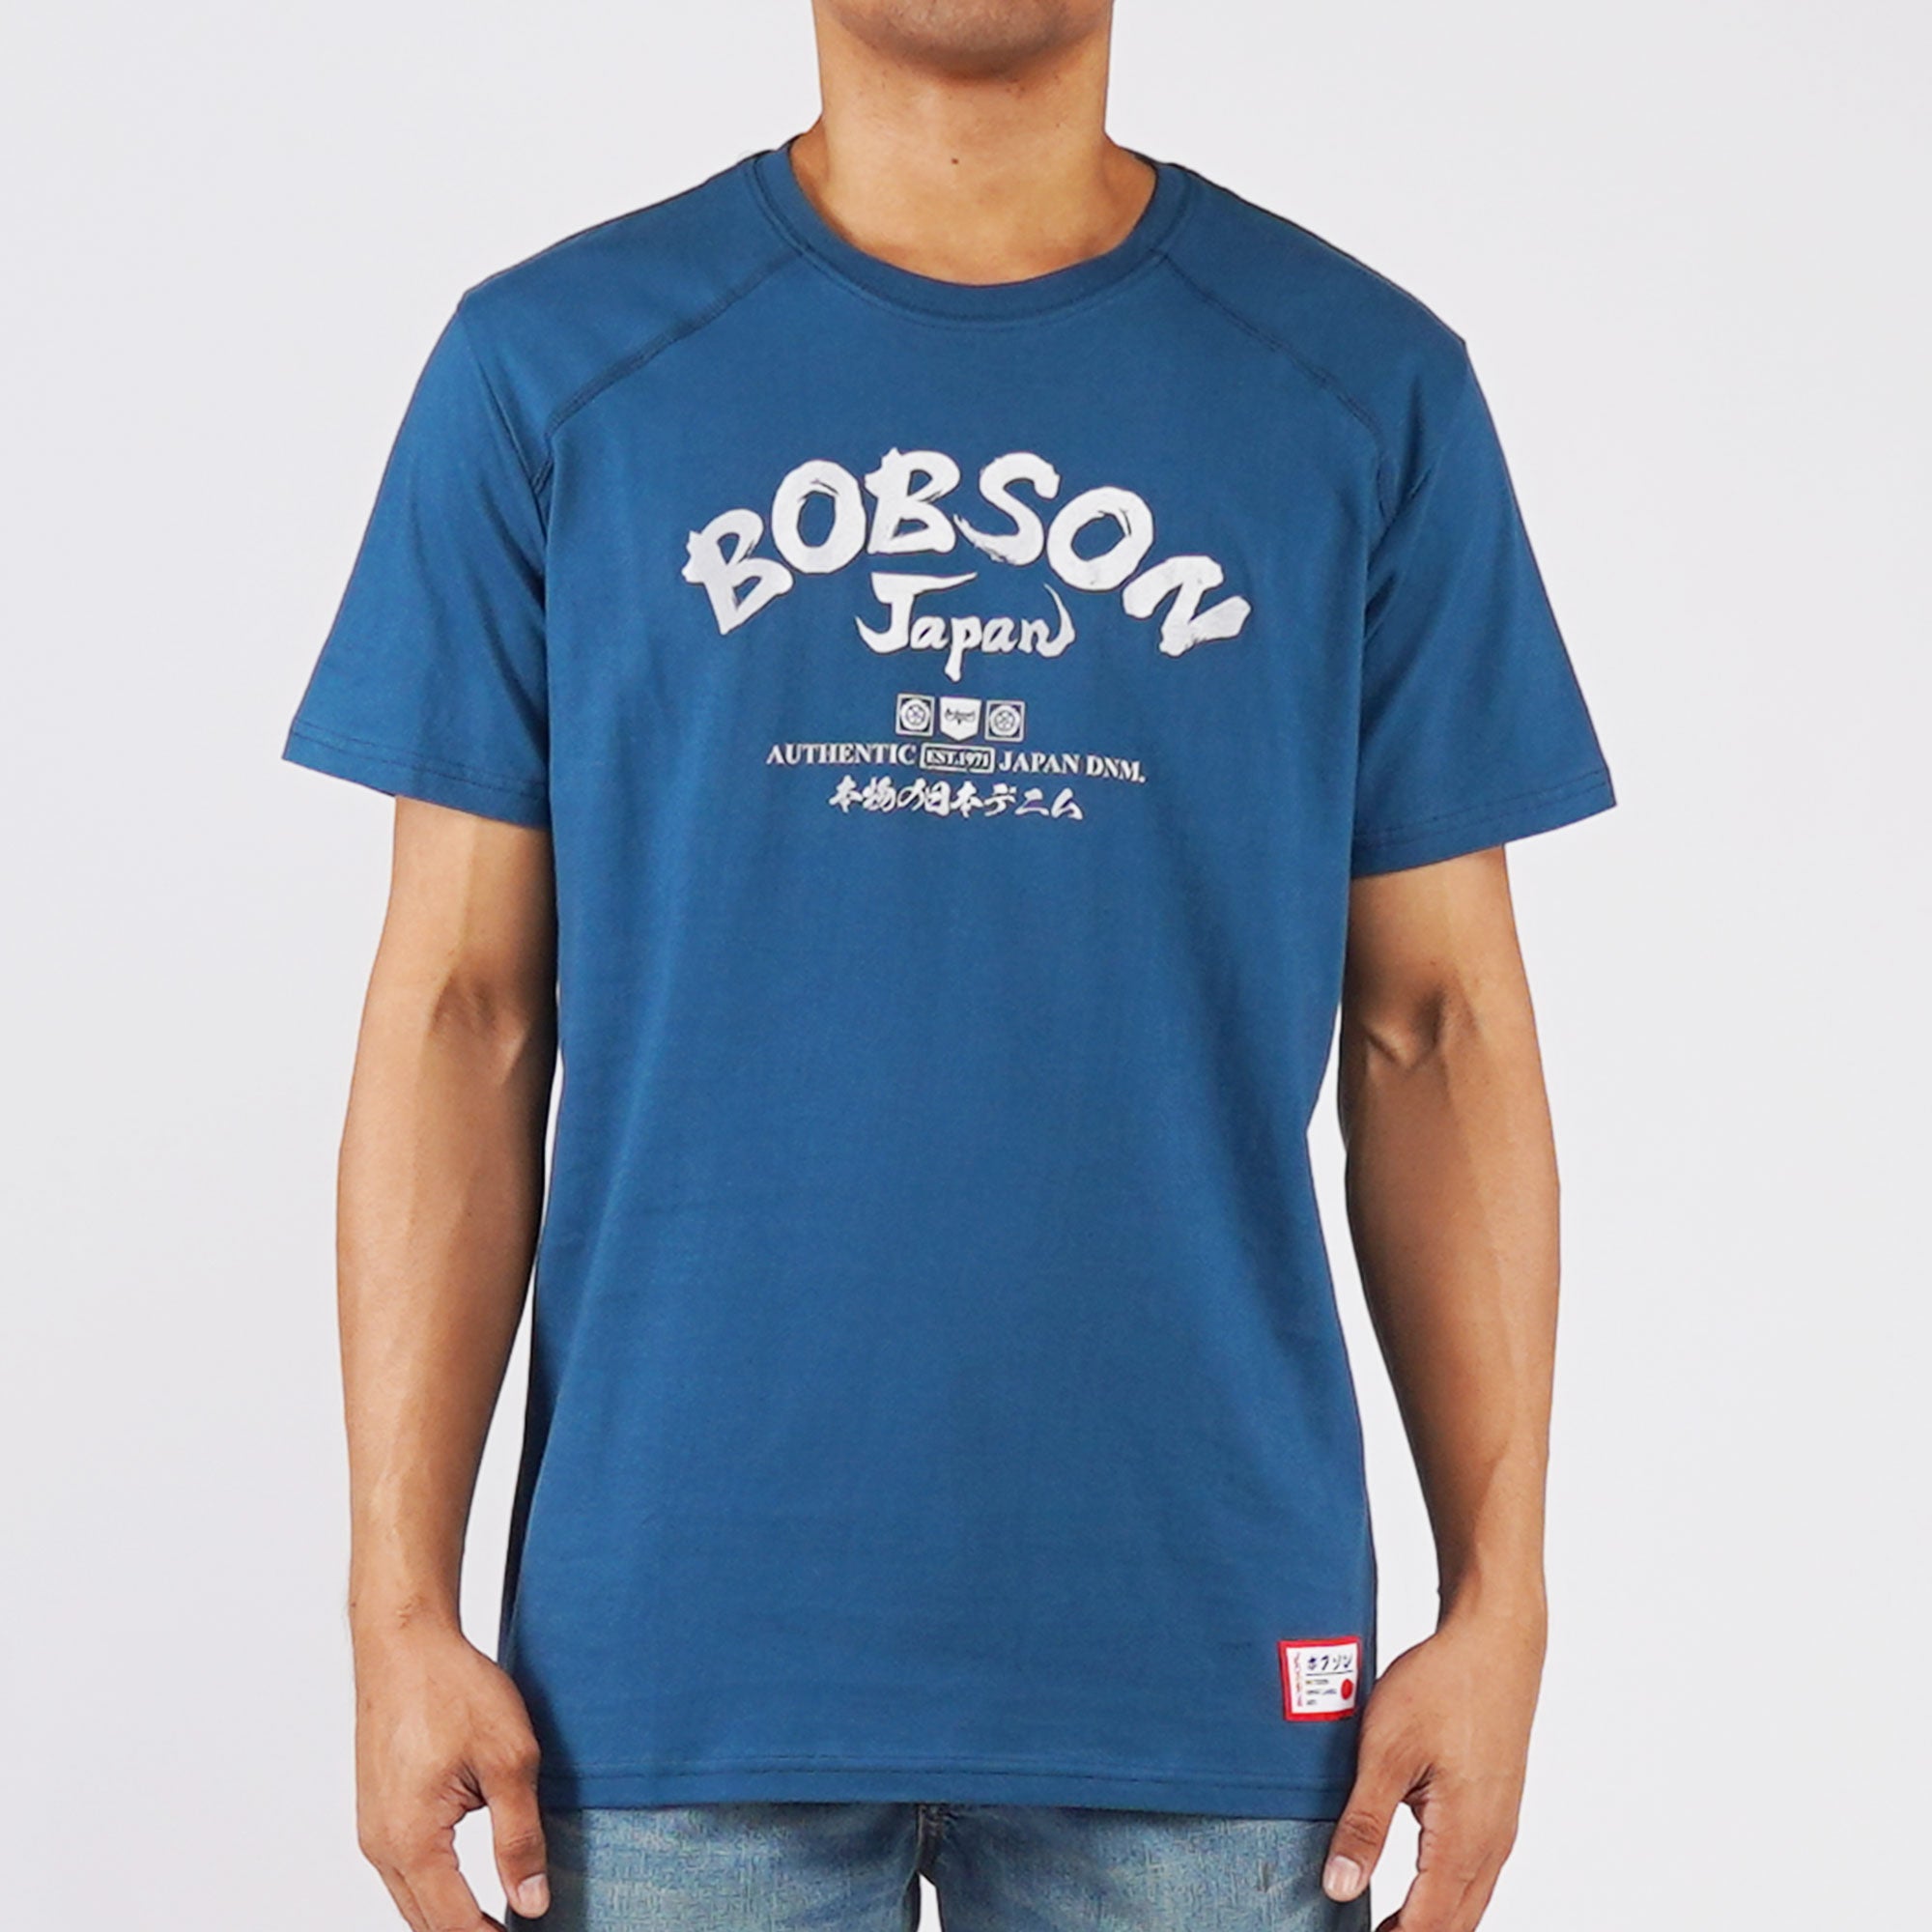 Bobson Japanese Men's Basic  Round Neck T shirt for Men Trendy Fashion High Quality Apparel Comfortable Casual Tees Slim Fit 125861 (Poseidon)